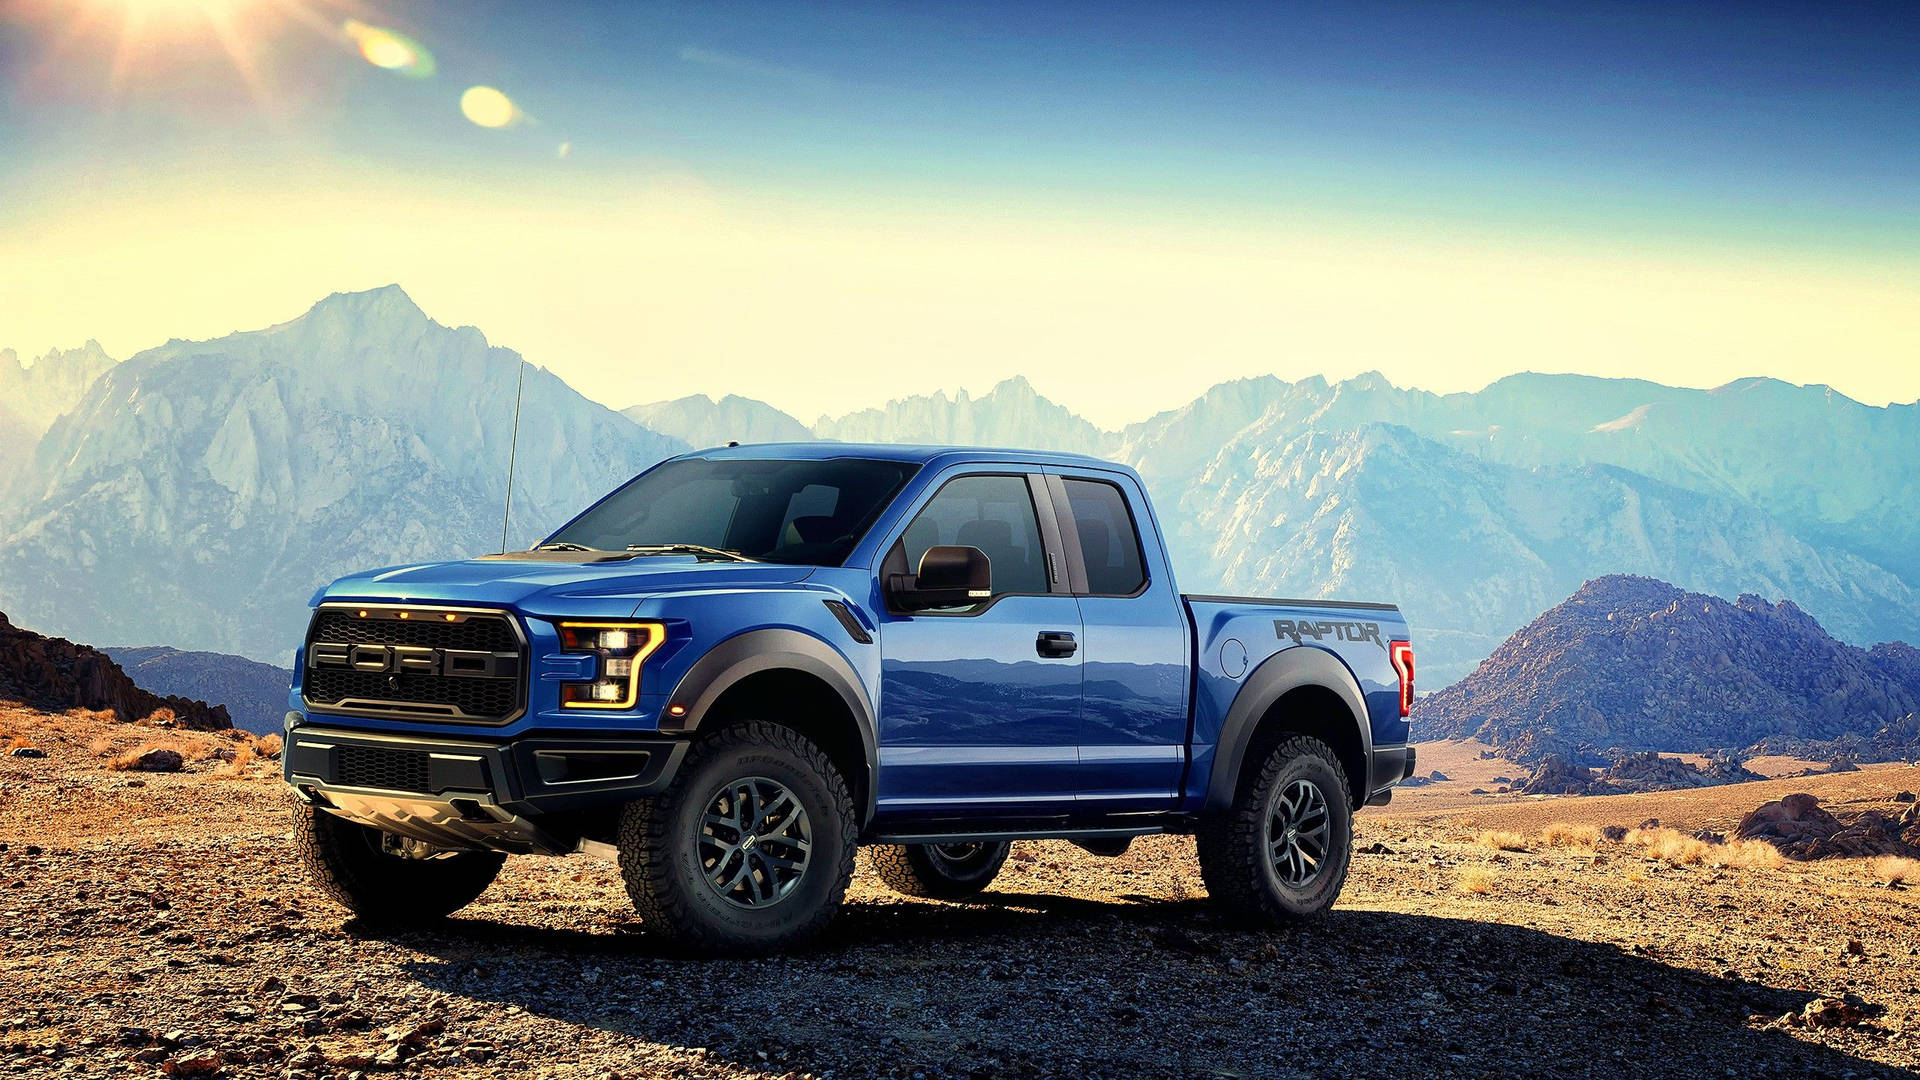 Ford Raptor With View Of Mountains Background